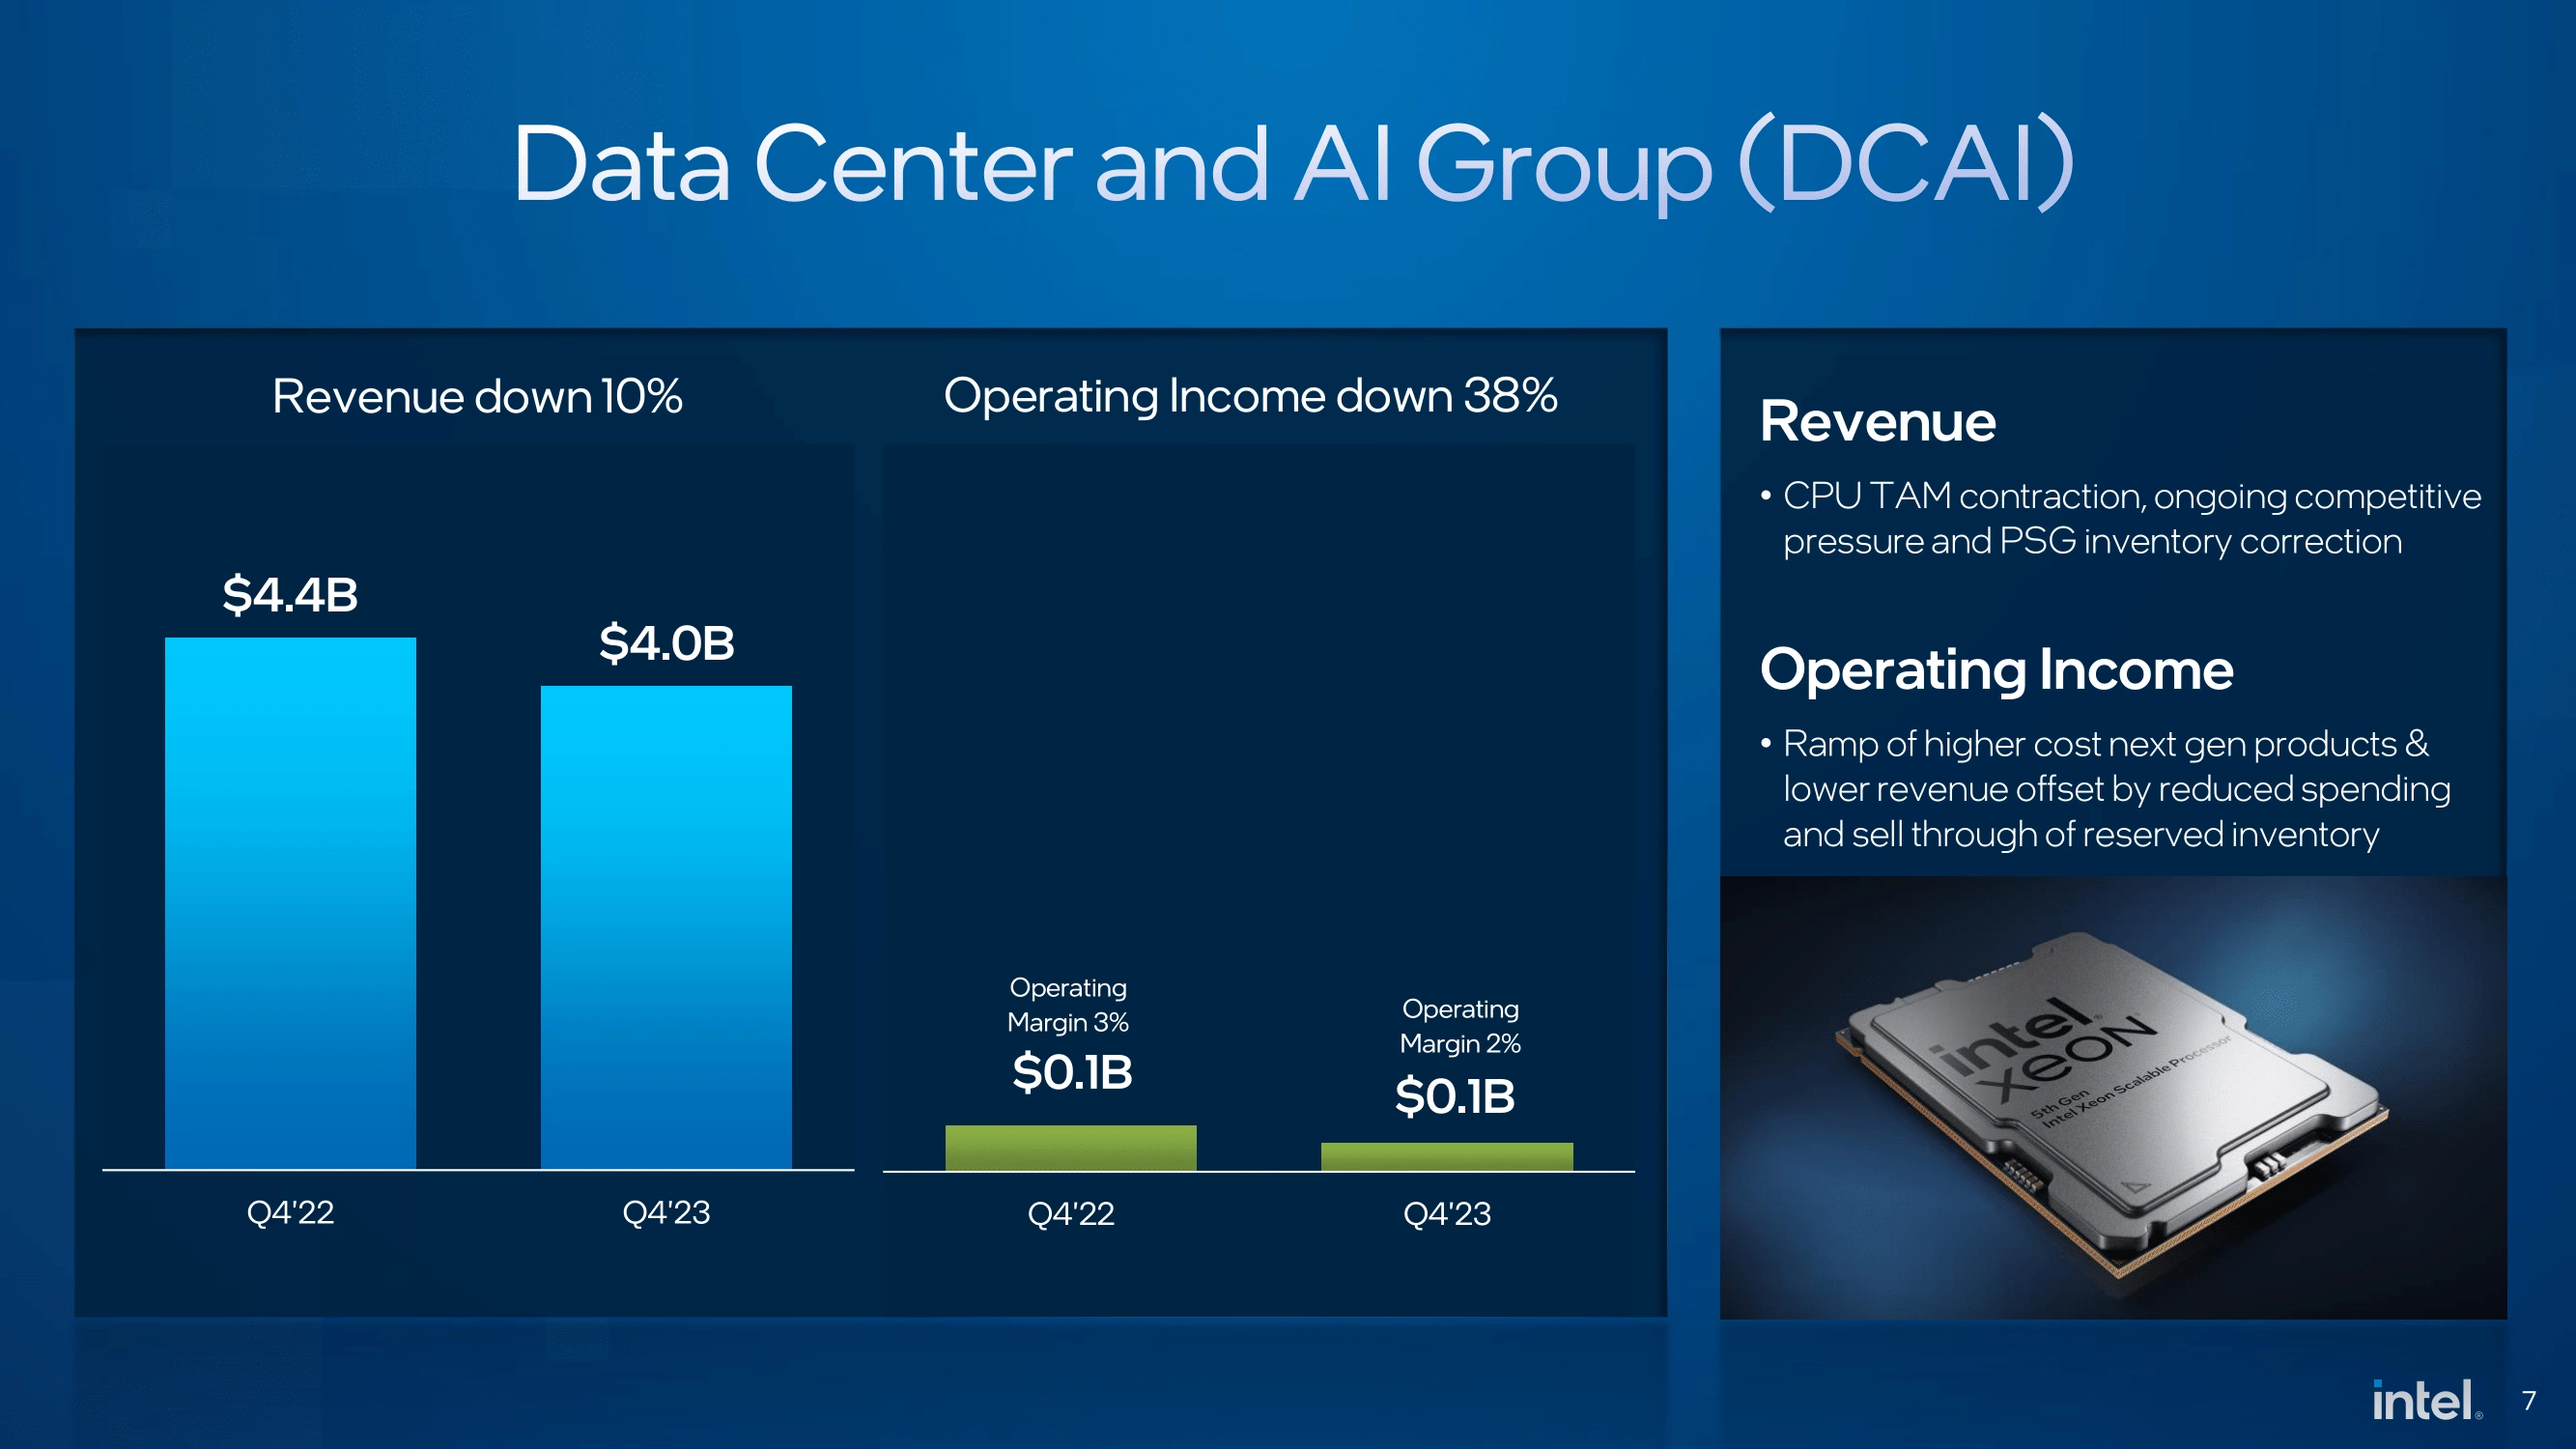 Intel Data Center and AI Group